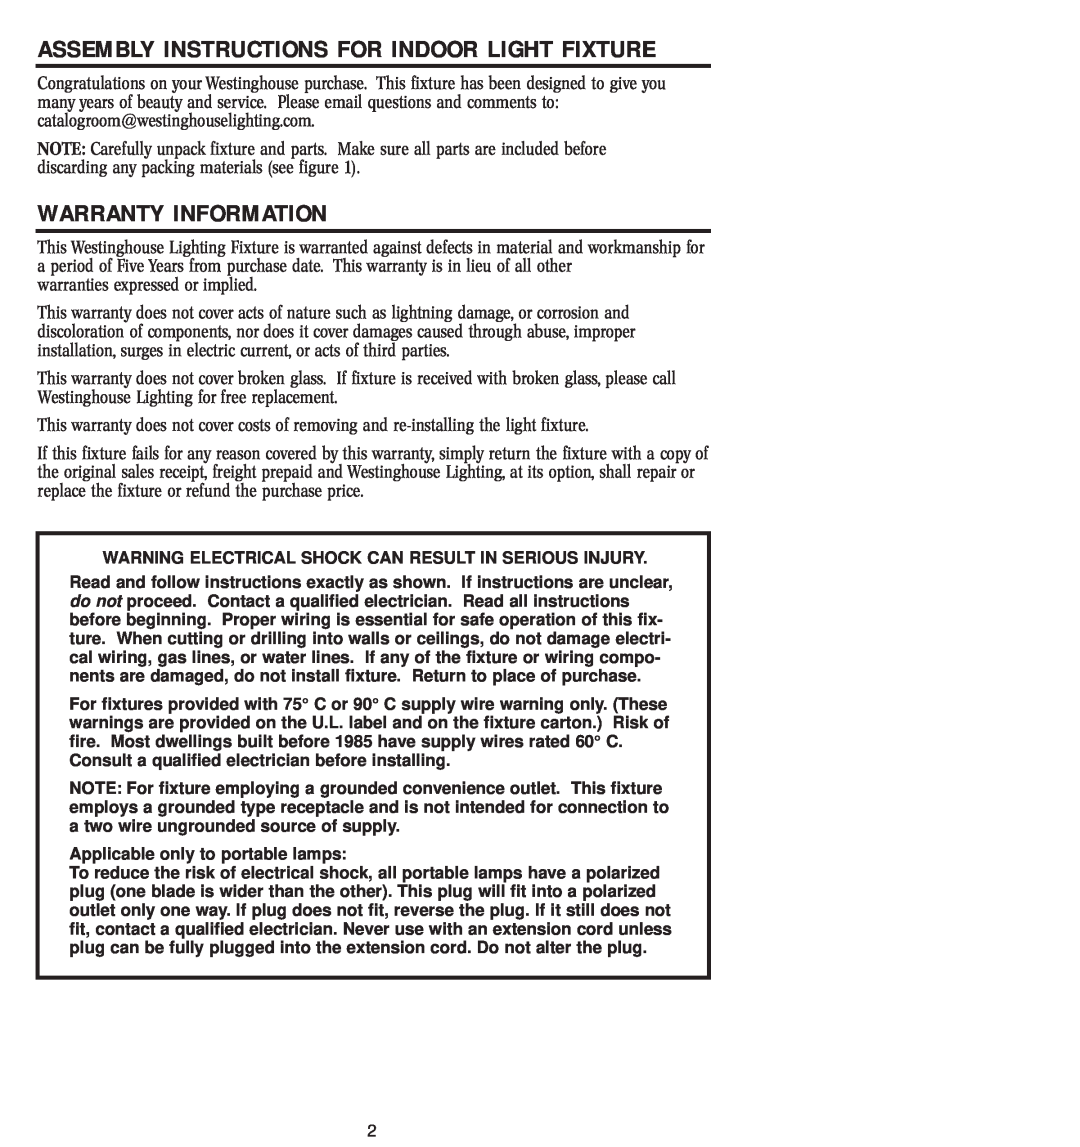 Westinghouse W-048 owner manual Warranty Information, Assembly Instructions For Indoor Light Fixture 